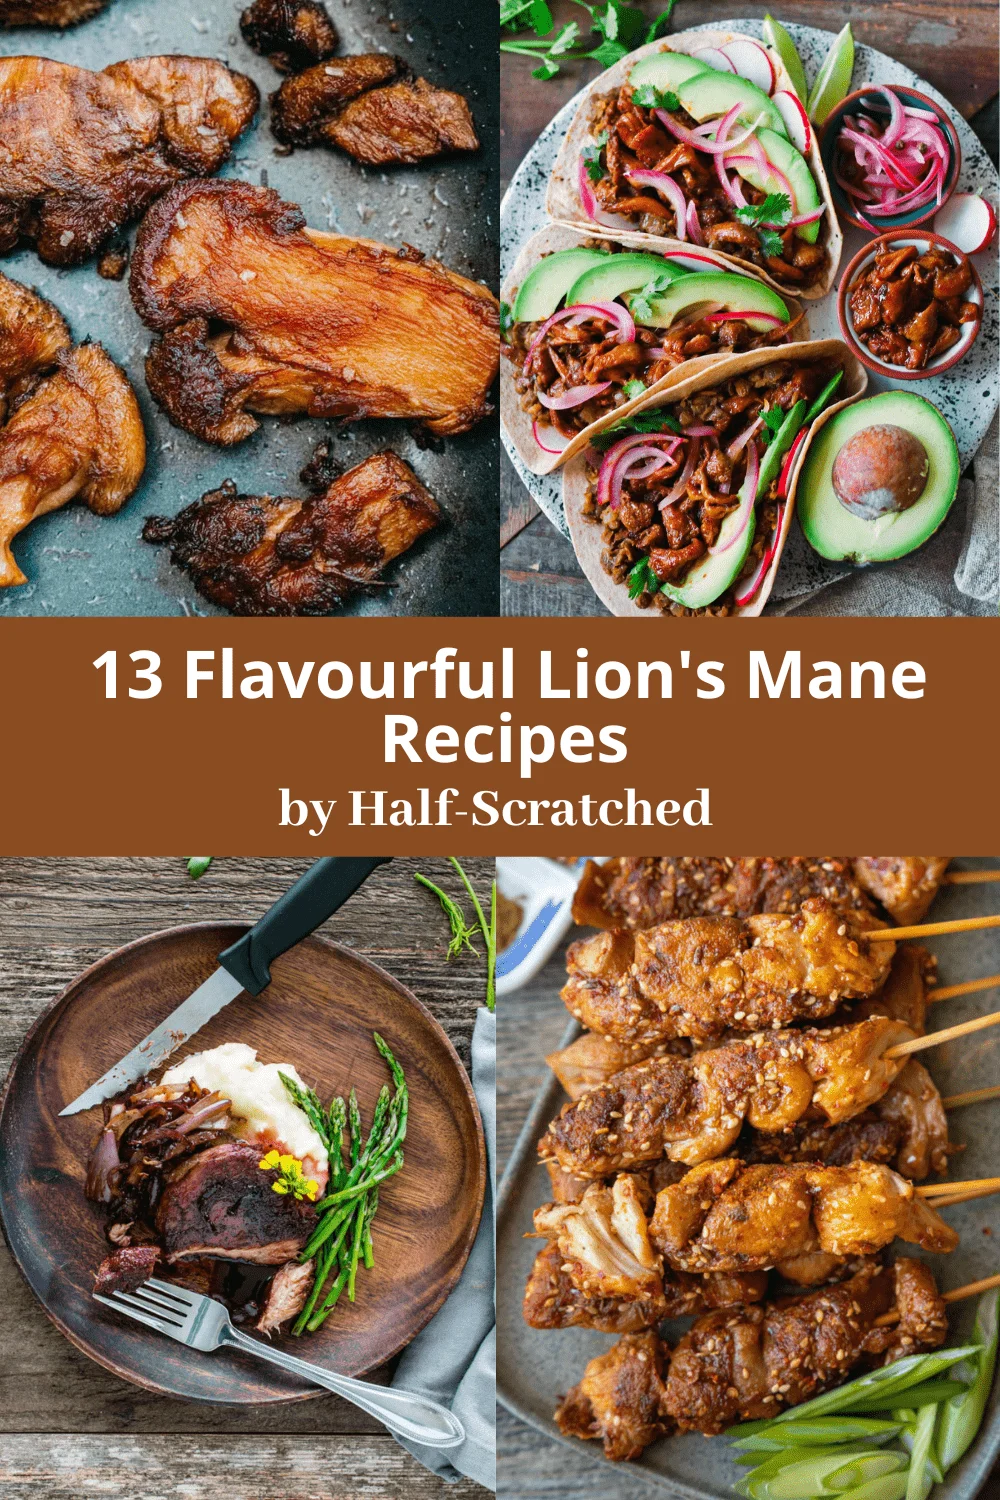 13 Flavorful Lion's Mane Recipes